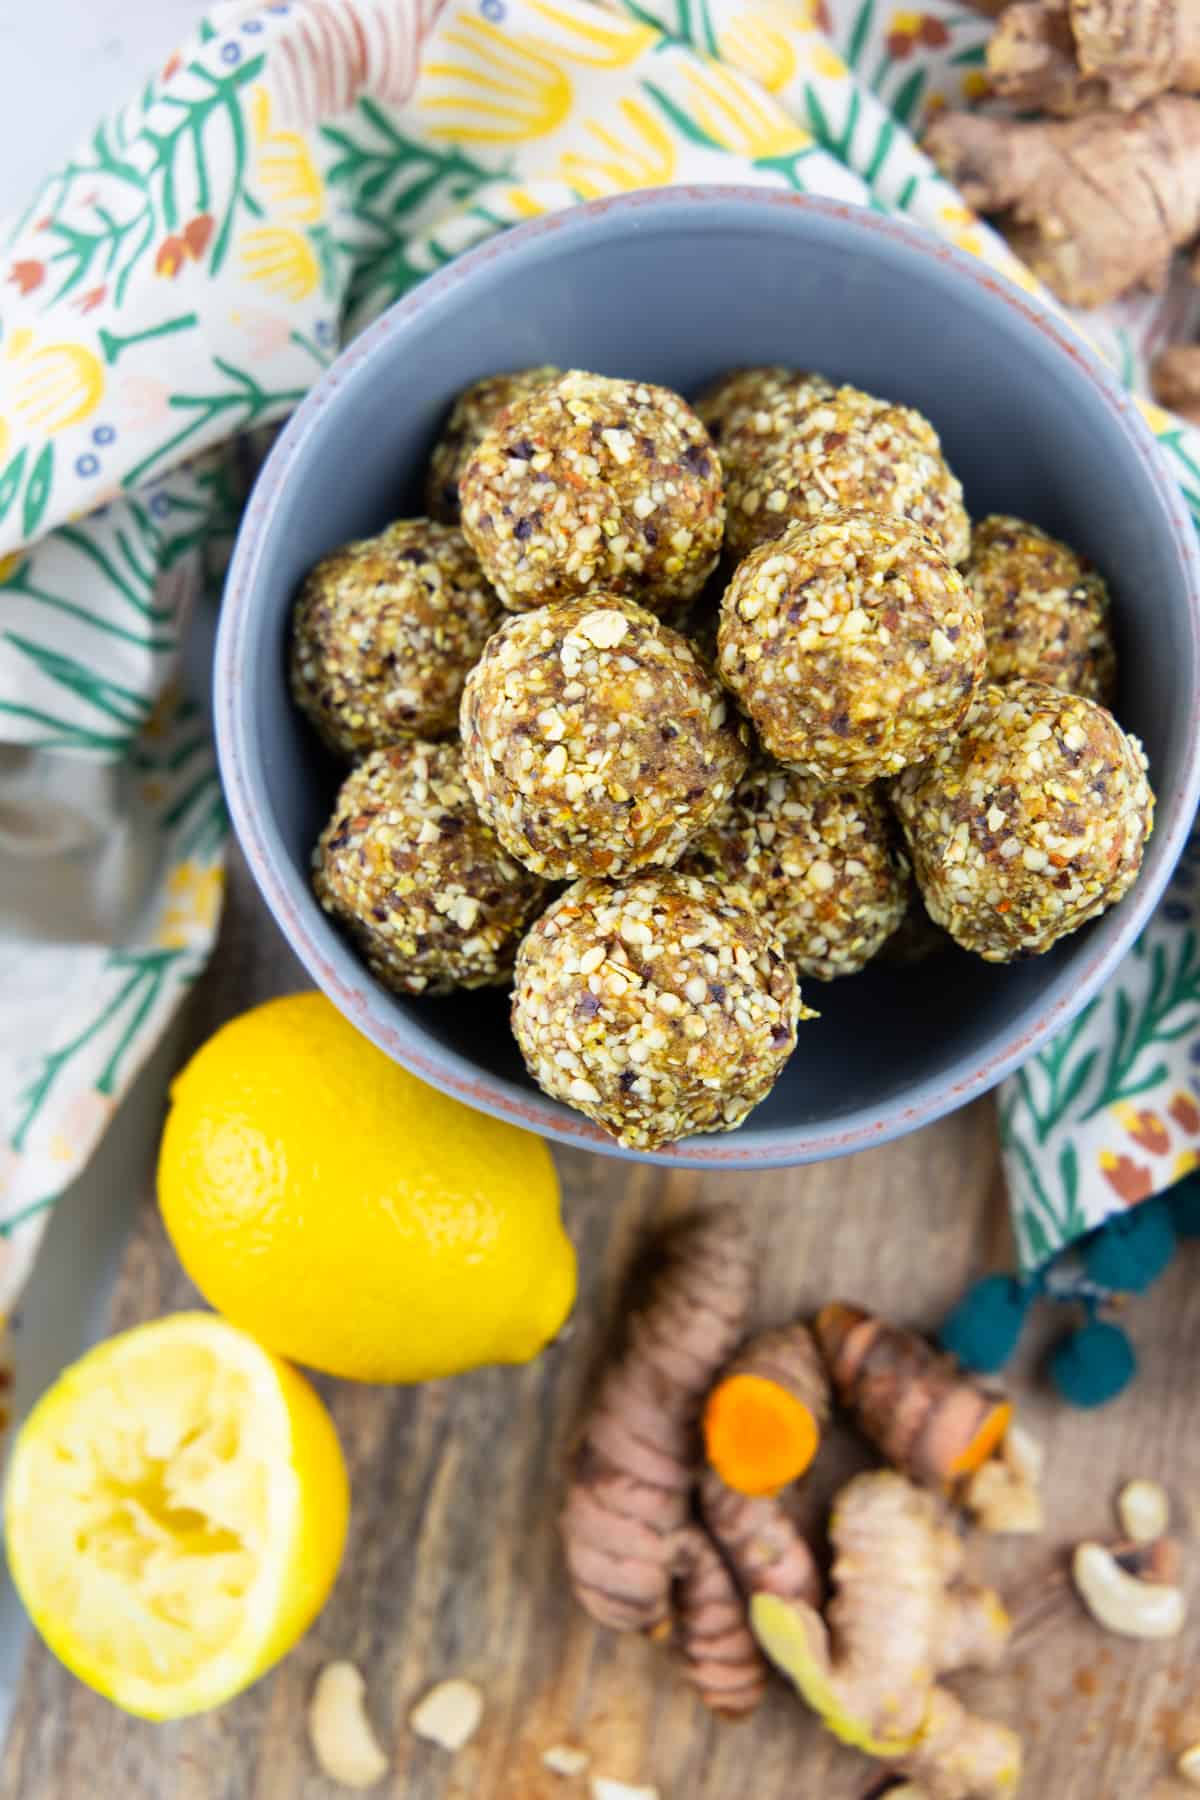 ginger turmeric energy balls in a blue bowl on a wooden board with lemon, ginger, and turmeric on the side 